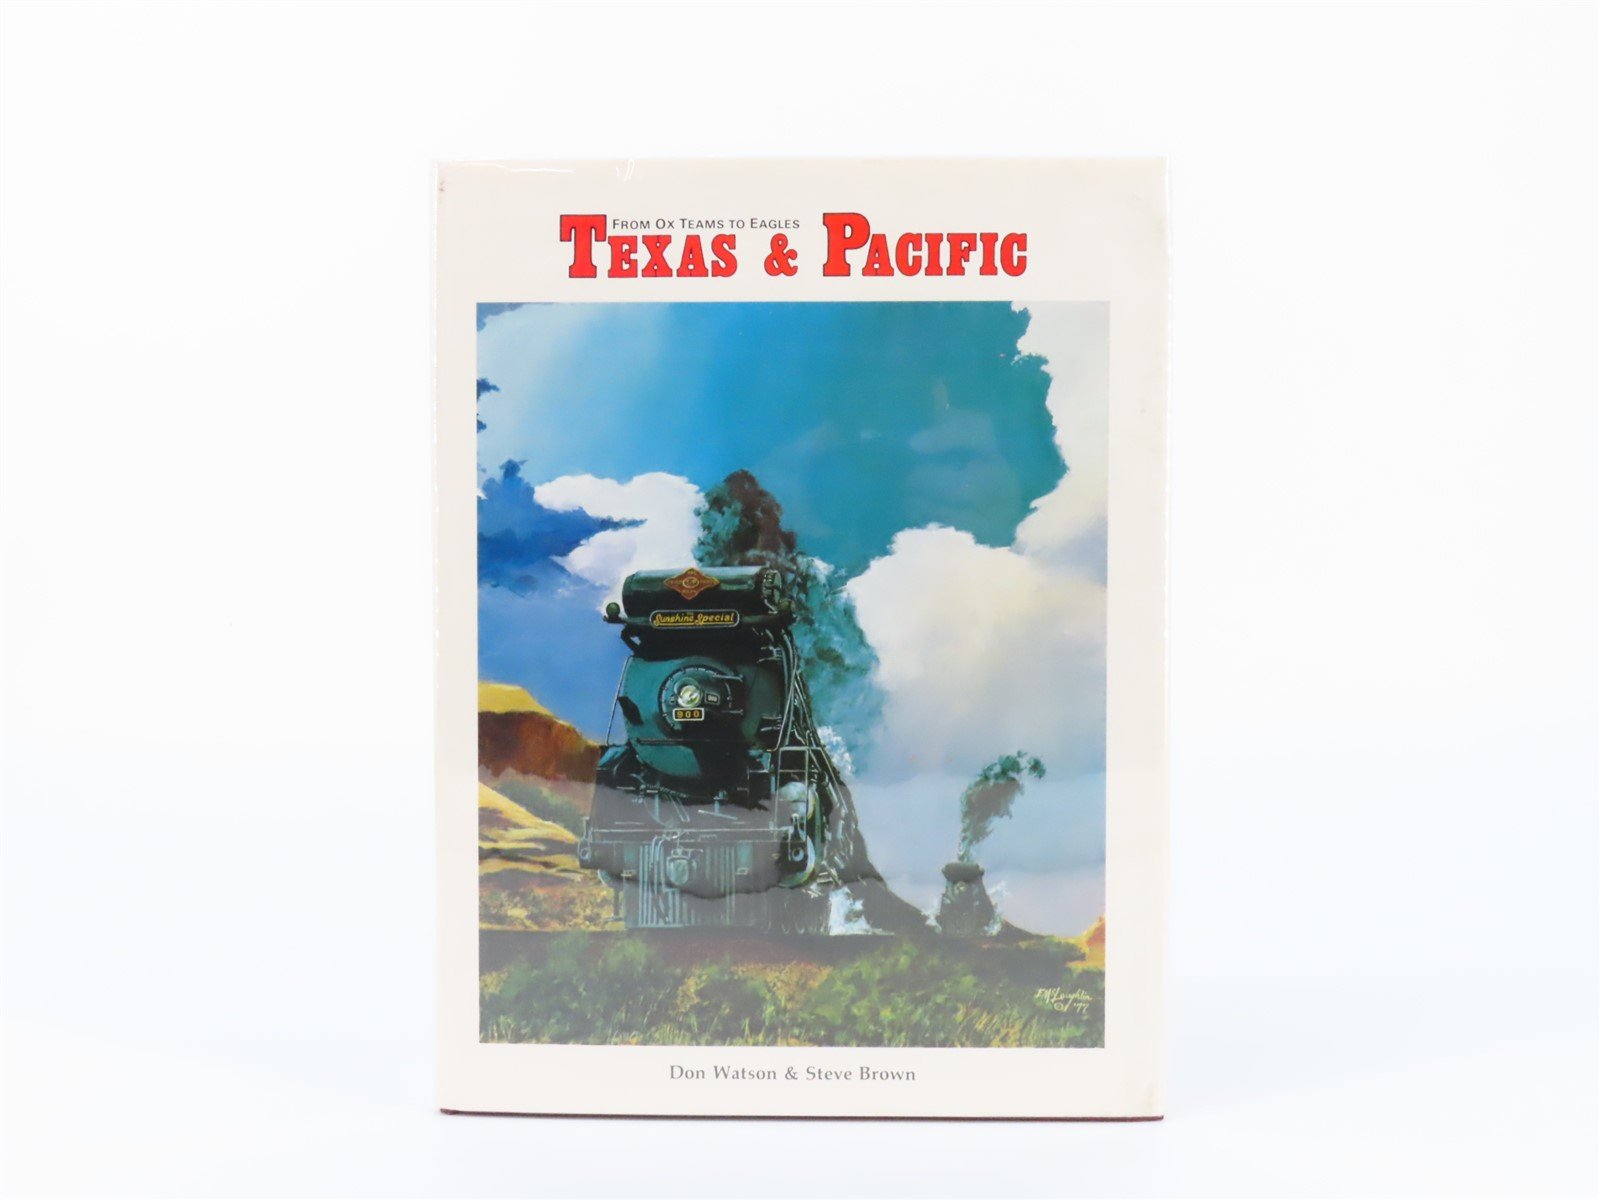 Texas & Pacific: "From Ox Teams To Eagles" by Watson & Brown ©1978 HC Book